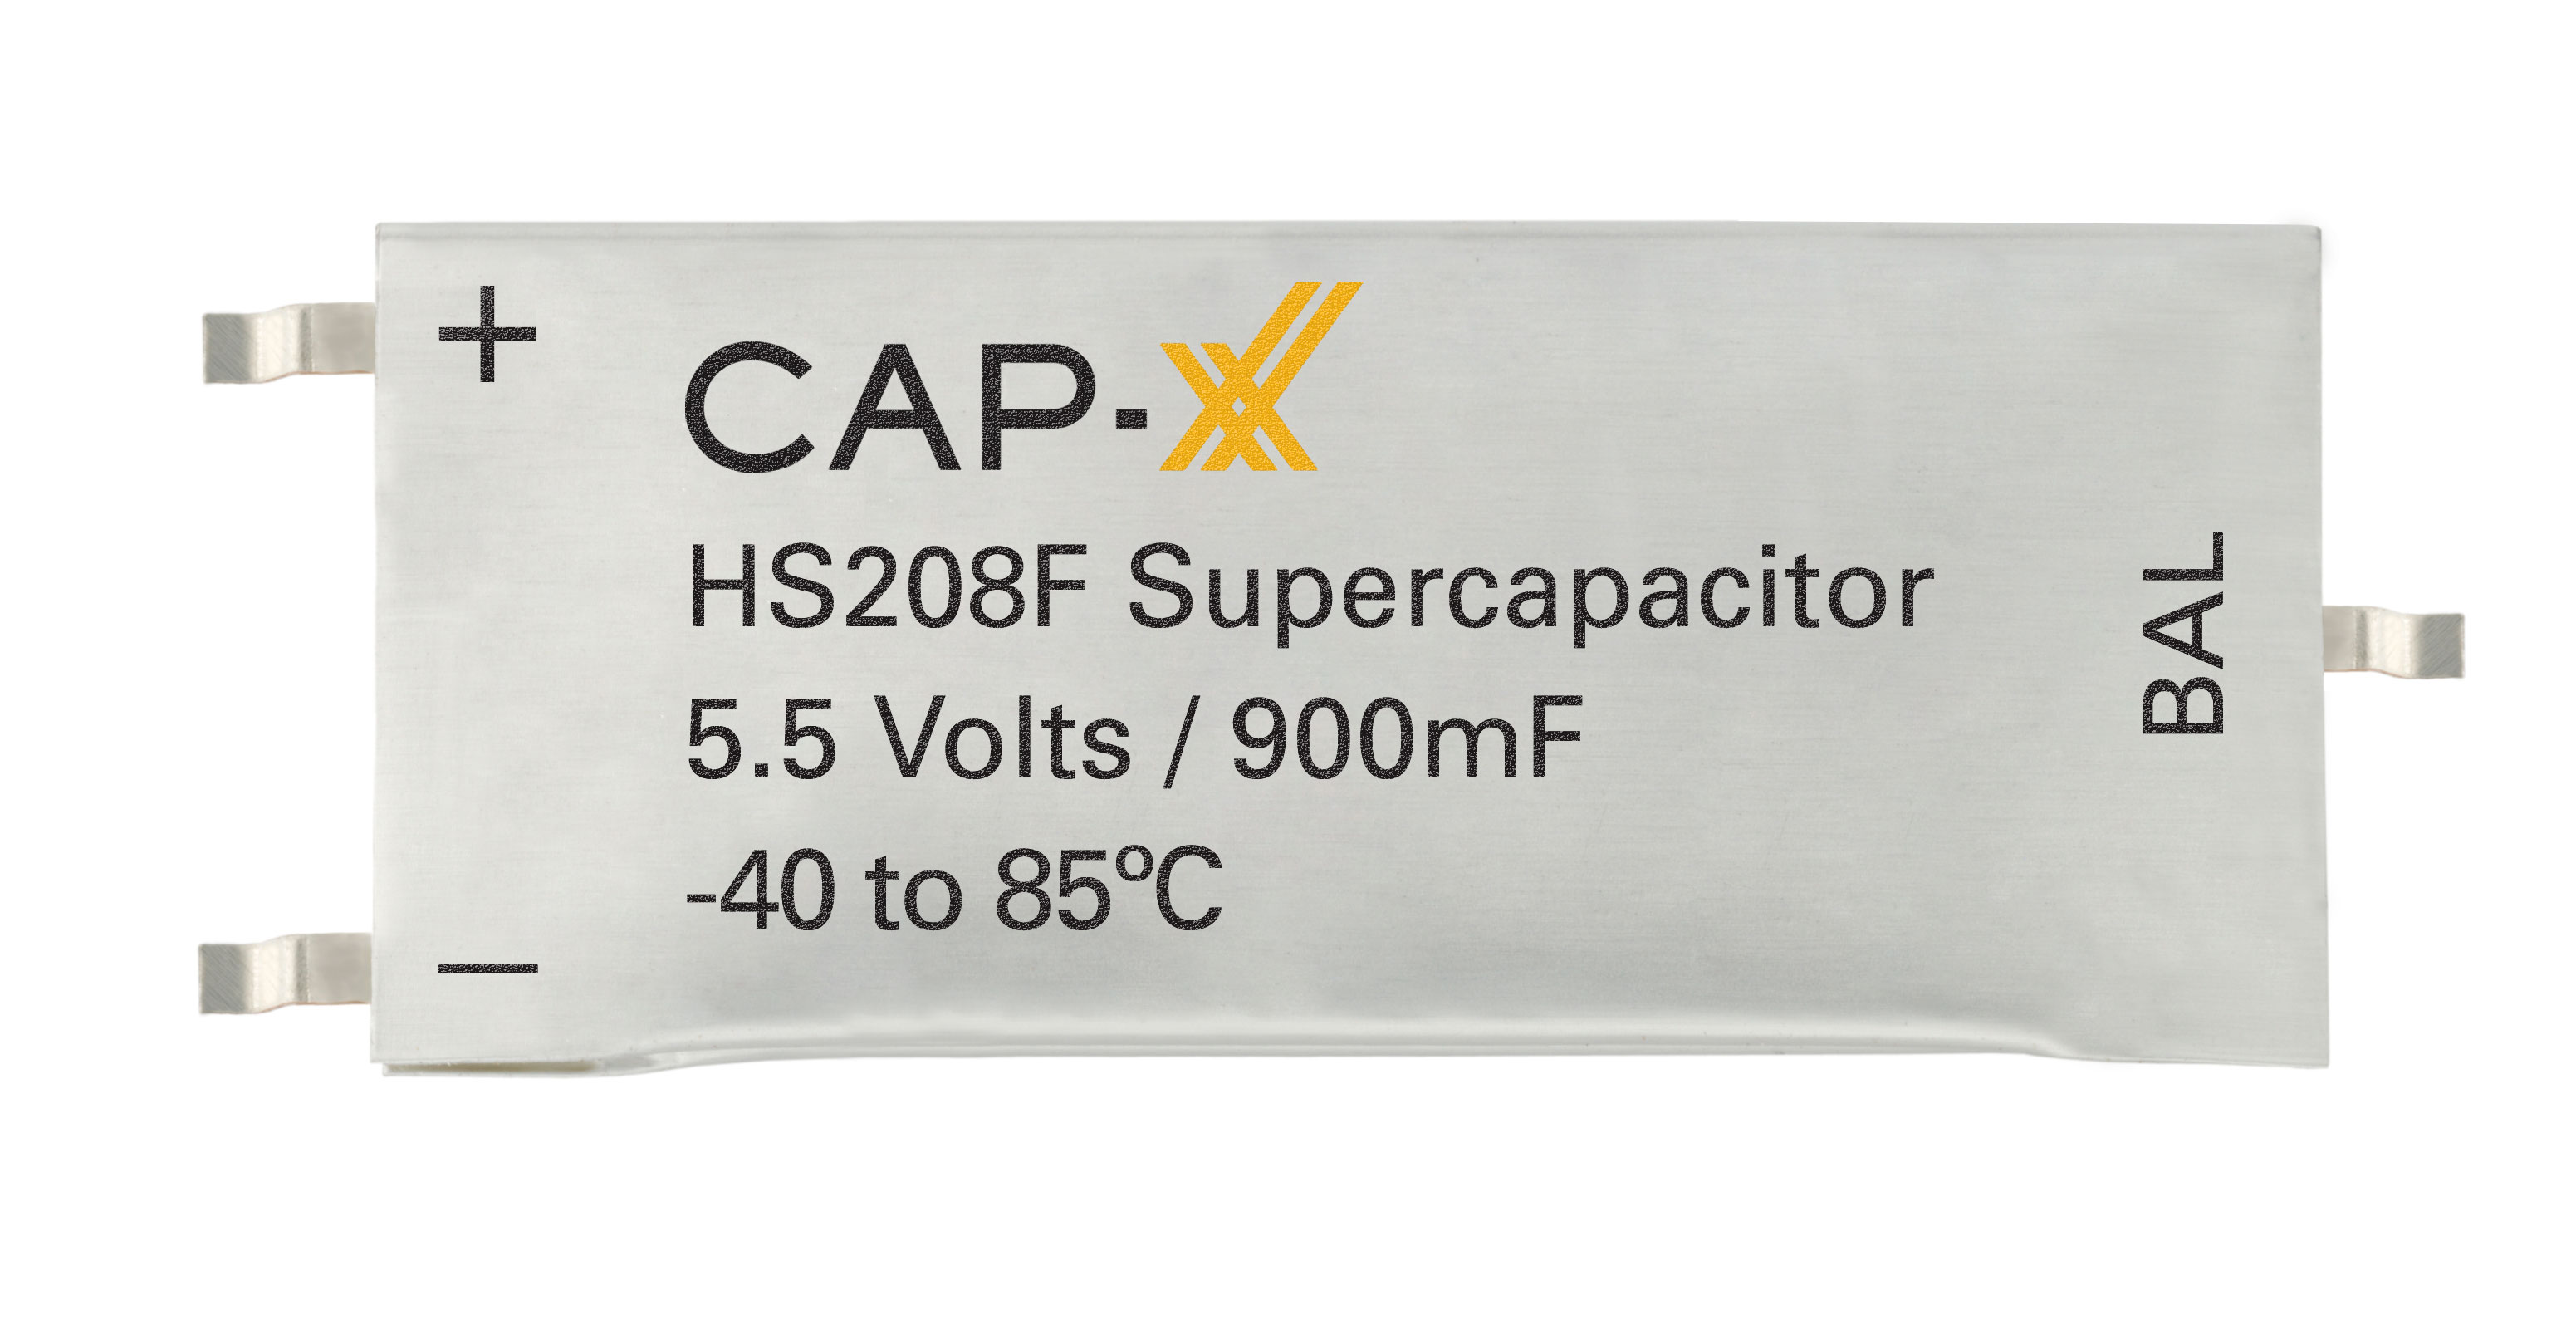 Thin prismatic CAP-XX HS208F supercap fits easily in Jack's small IoT device and delivers high currents required for the data communications via BLE 5.2 with a certified Gateway device.